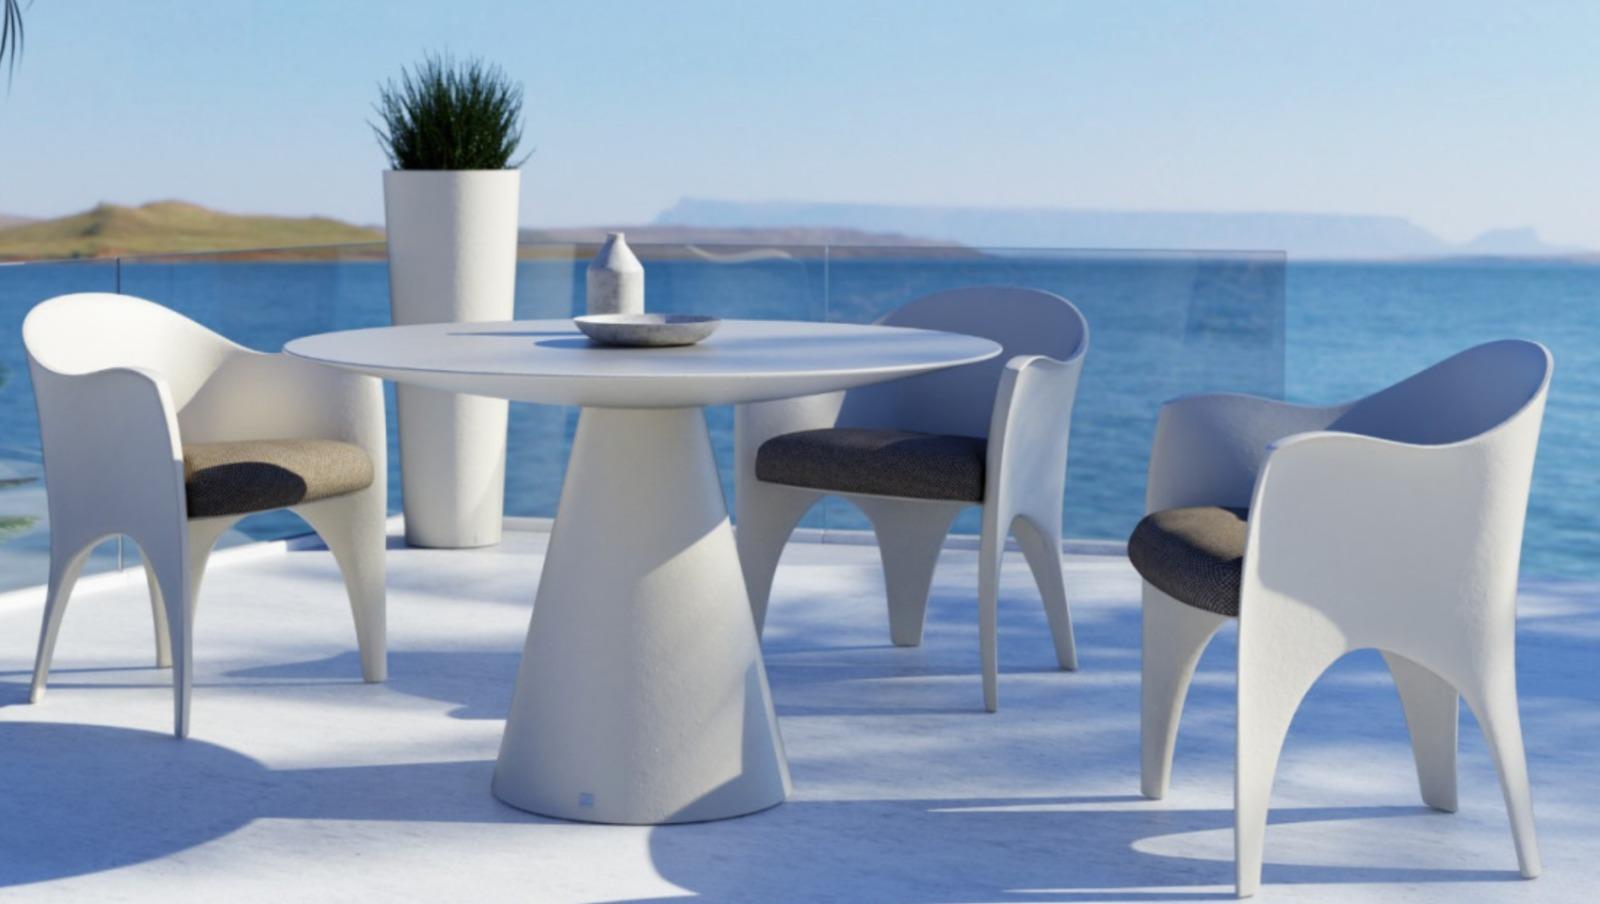 SUMMER 2024

Dining table

General information

Size: Ø150 x 75 cm / Ø59 x 29.5 in

Seats: 6

Weight: 55 kg / 121.2 lbs

Materials and colors

Structure: Resin reinforced with fiberglass, finished in white matte suitable for outdoor.